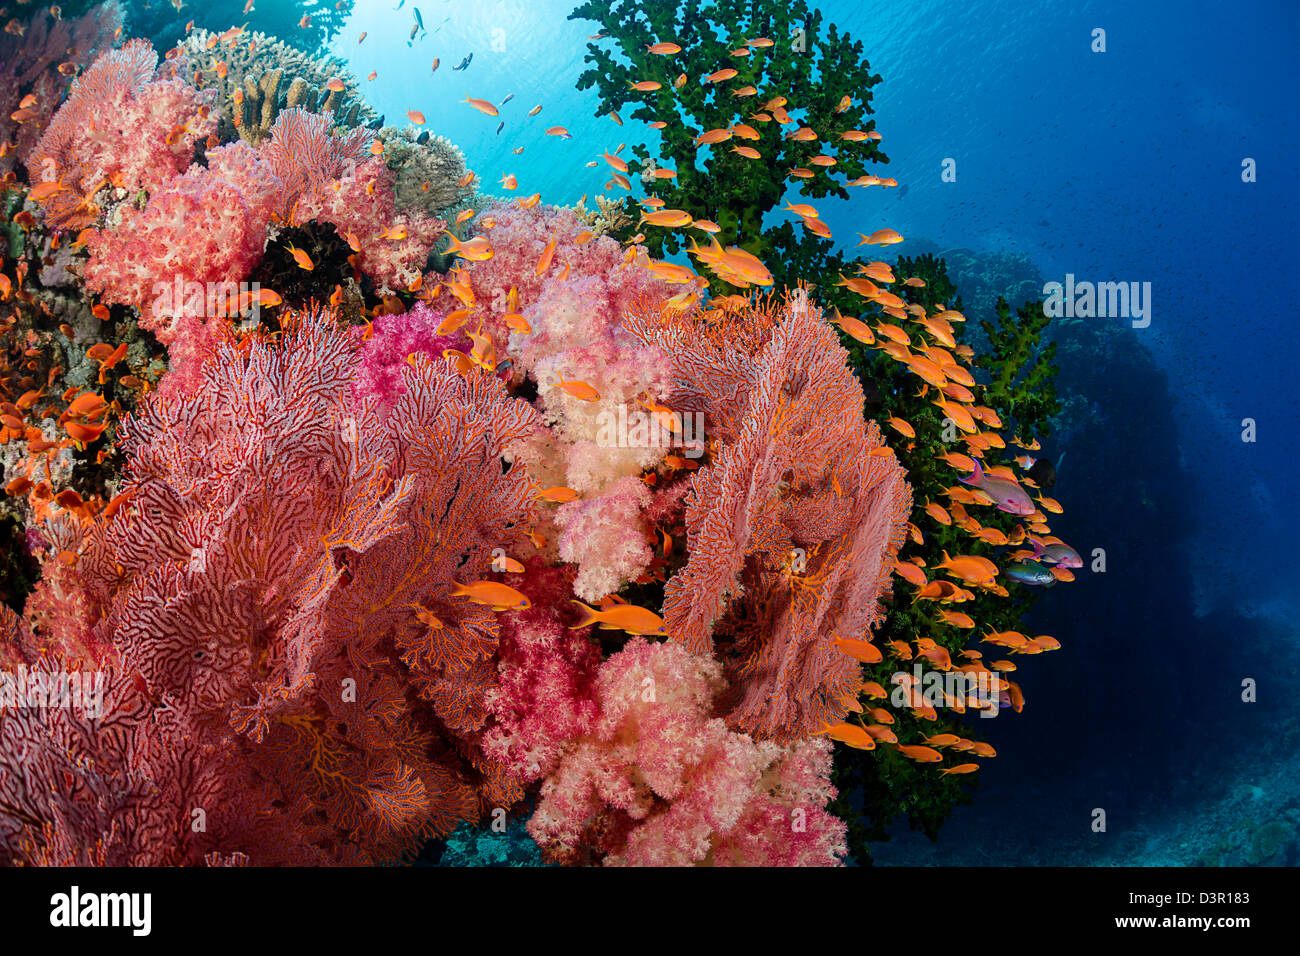 Alconarian and gorgonian coral with schooling anthias dominate this Fijian reef scene. Stock Photo